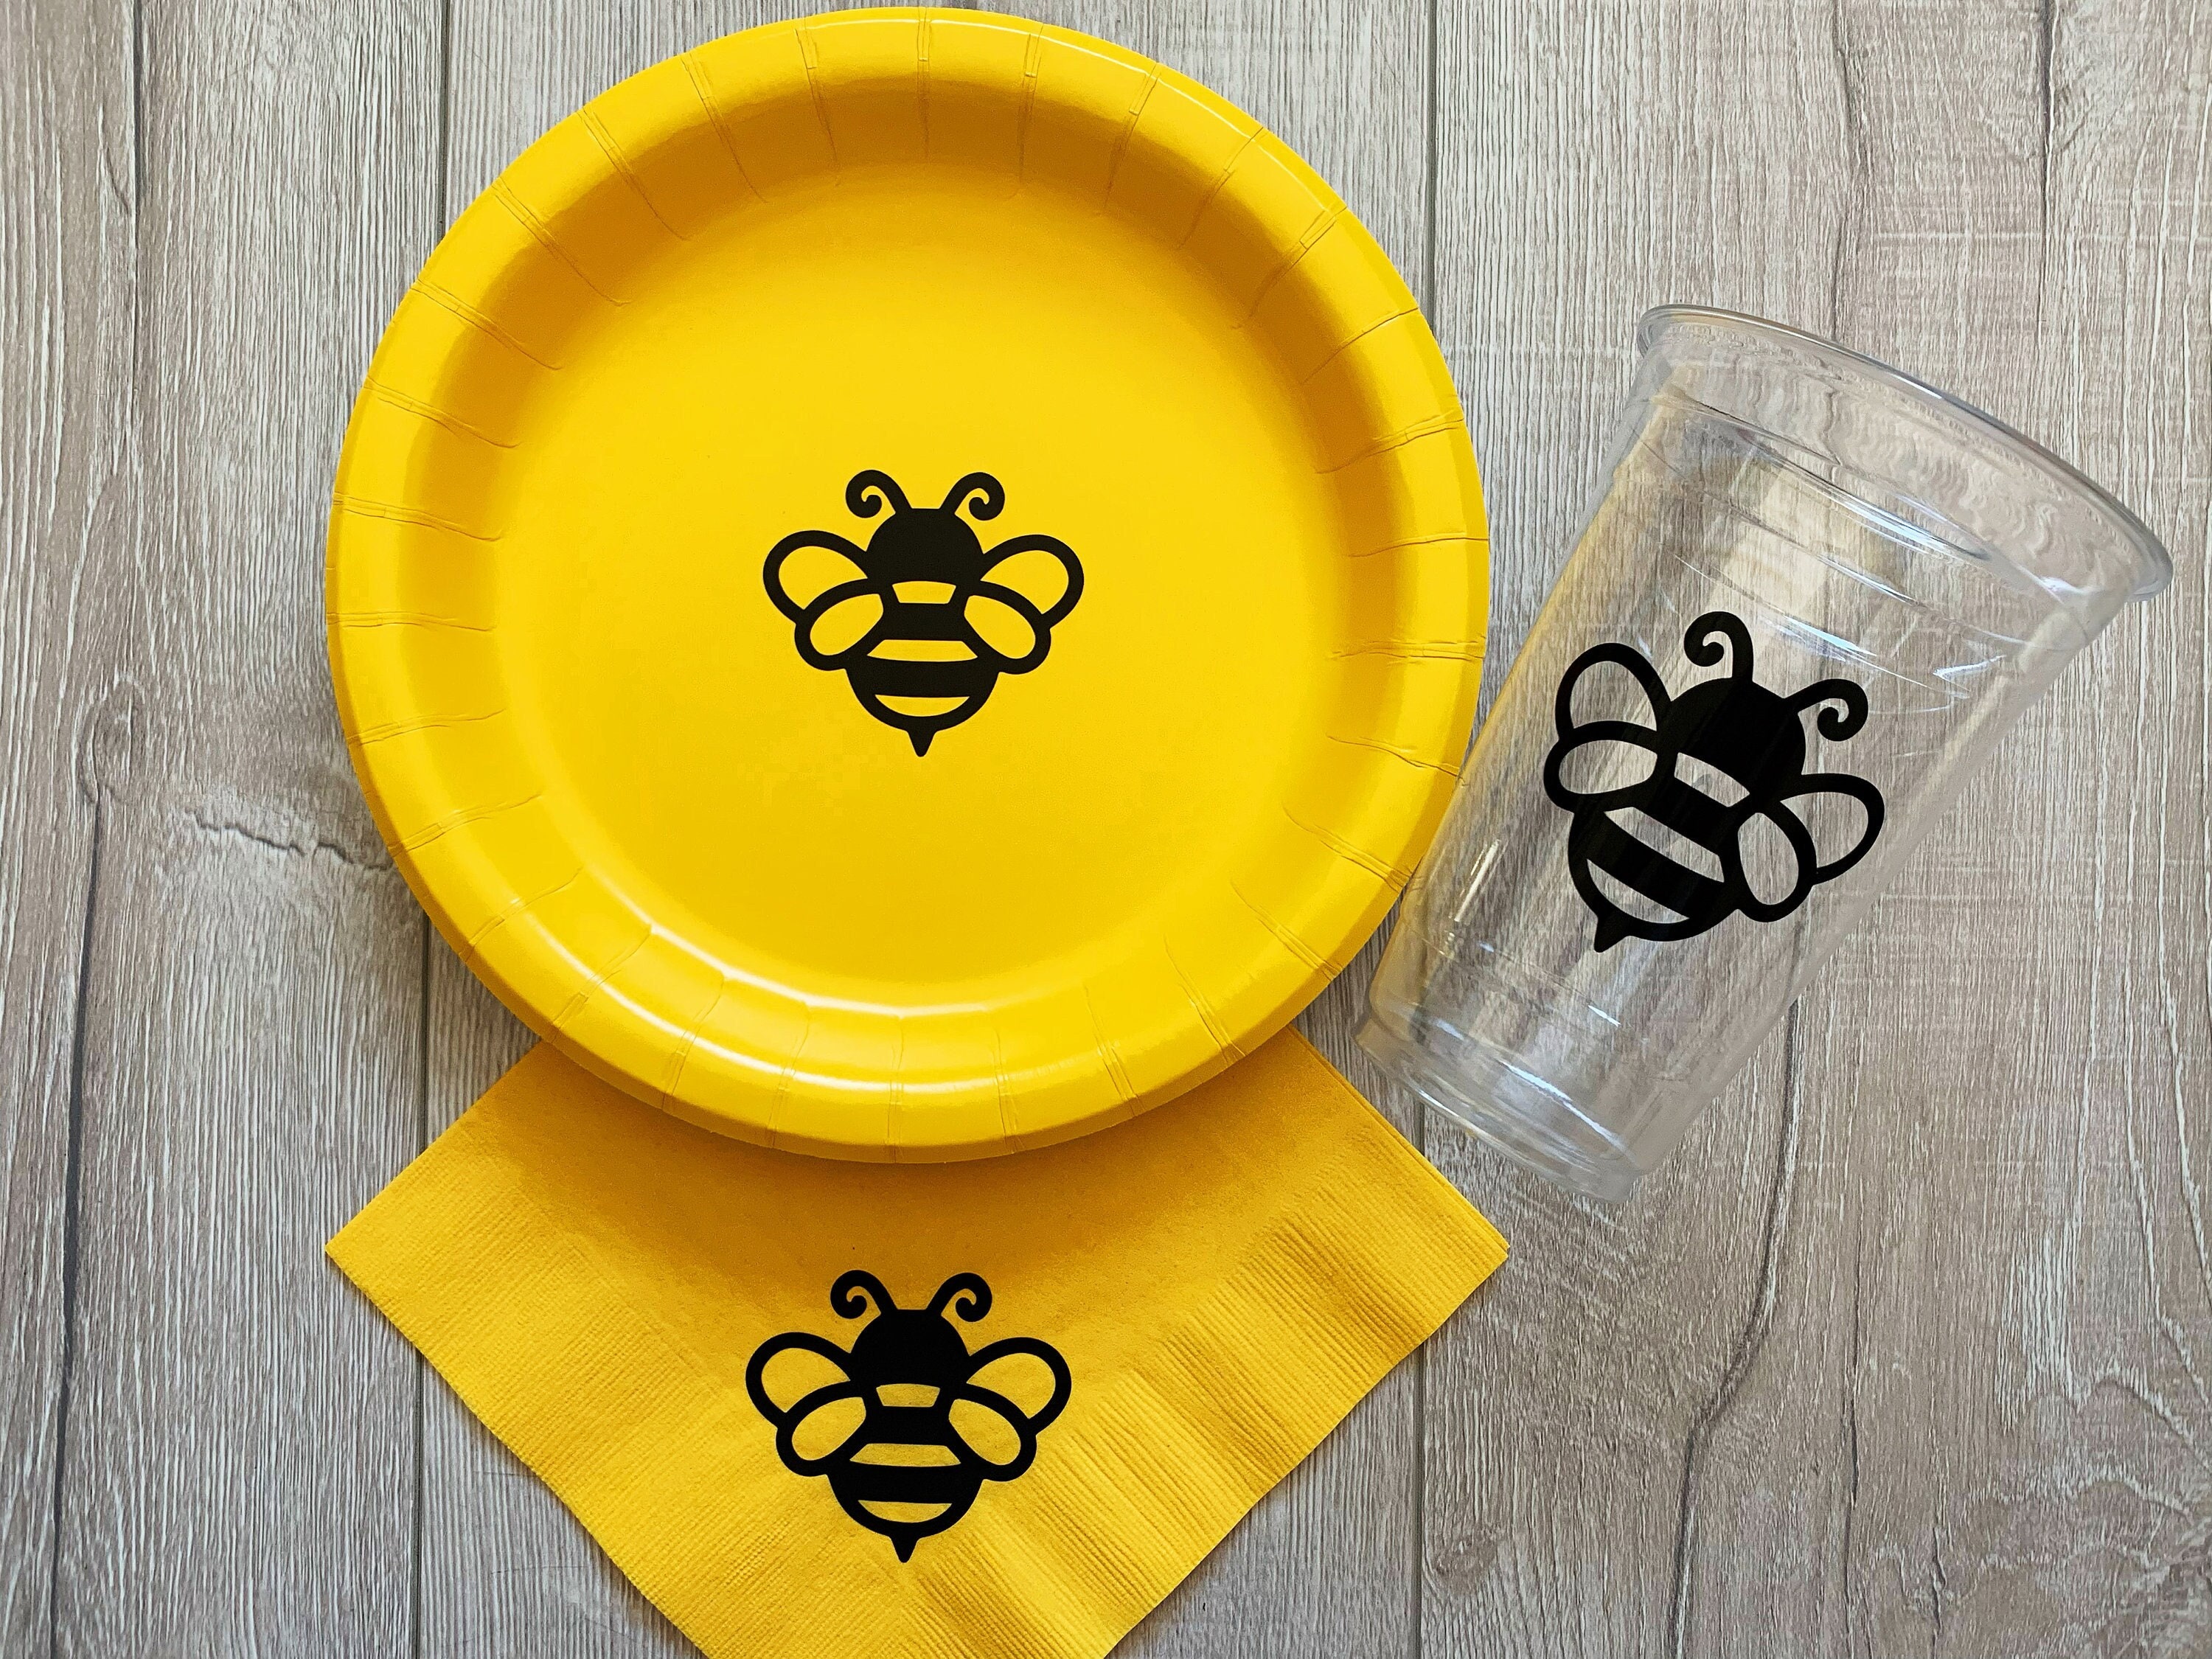  KEFAN Bee Birthday Party Decorations, Bee Party Tableware  Supplies, Plates, Cup, Napkin, Cutlery, Tablecloth, Straws for Children  Birthday Baby Shower Decorations, Services 20 : Toys & Games